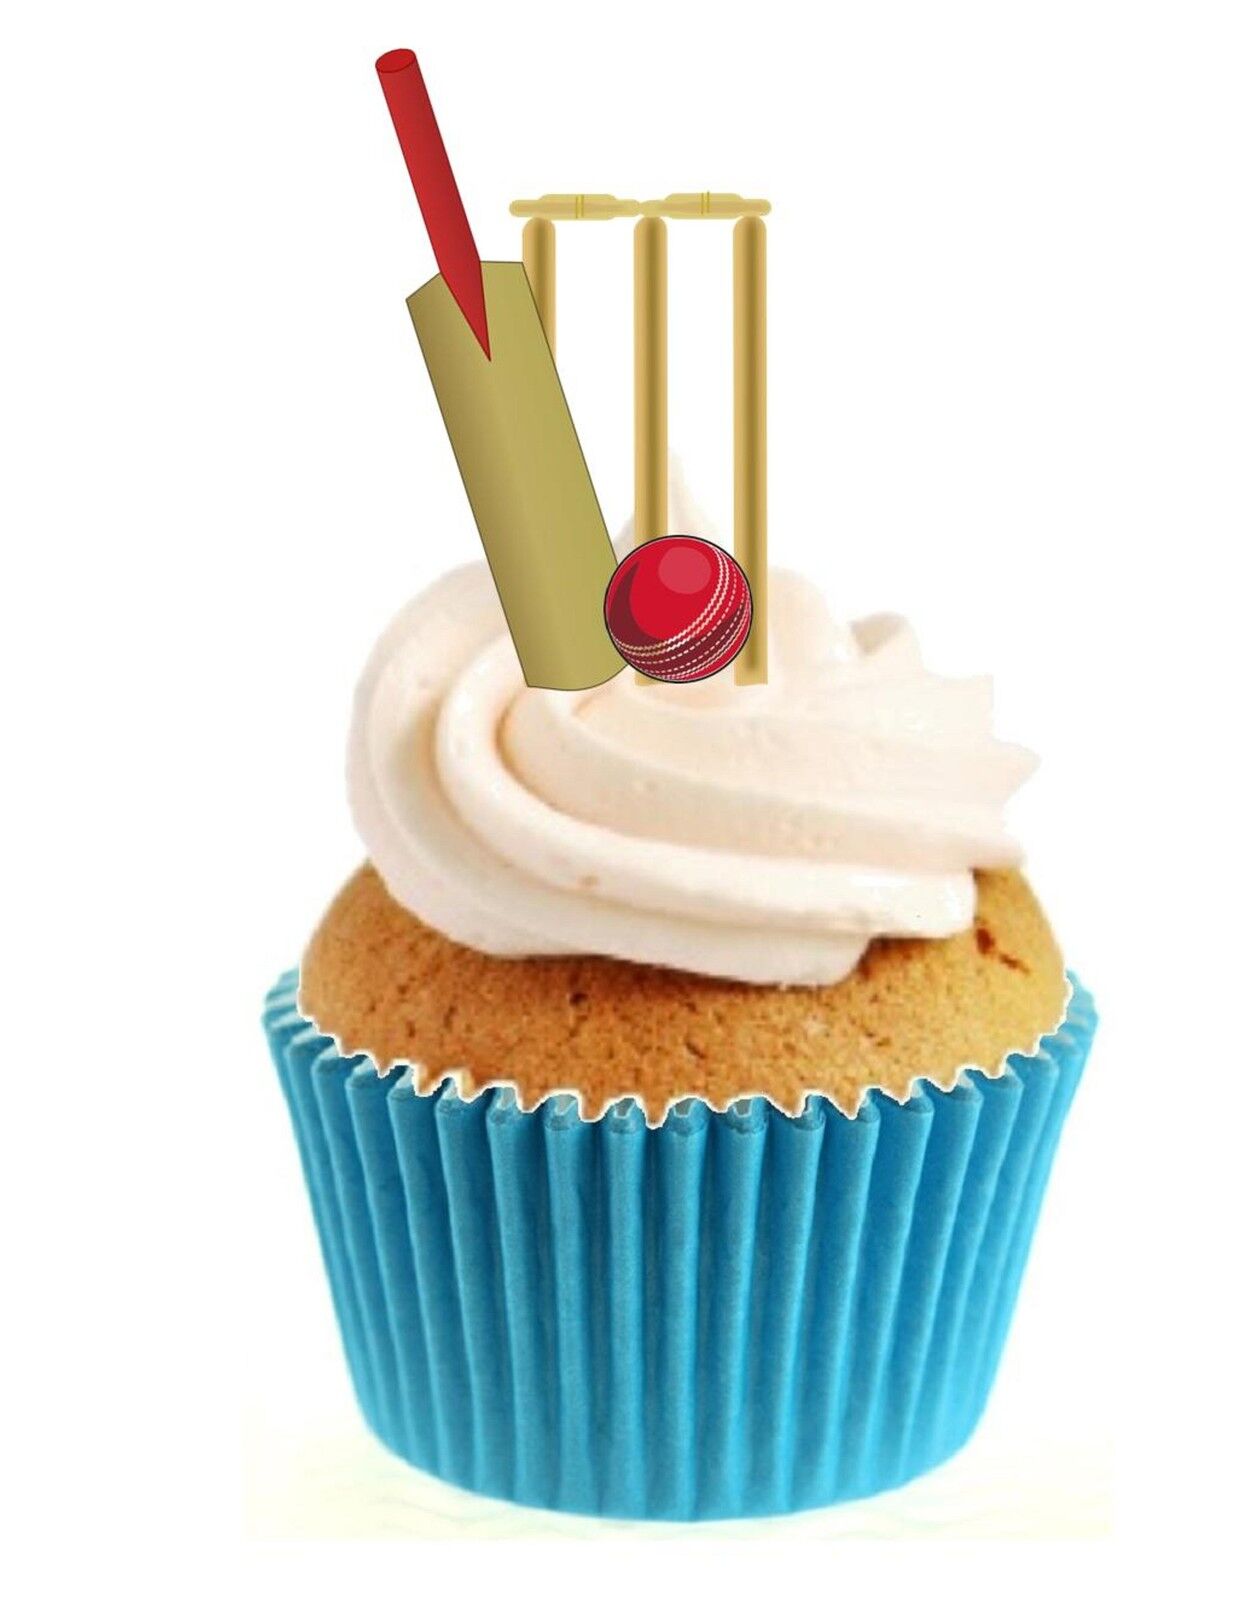 Novelty Cricket Bat Ball & Stumps 12 Edible Stand Up wafer paper cake toppers